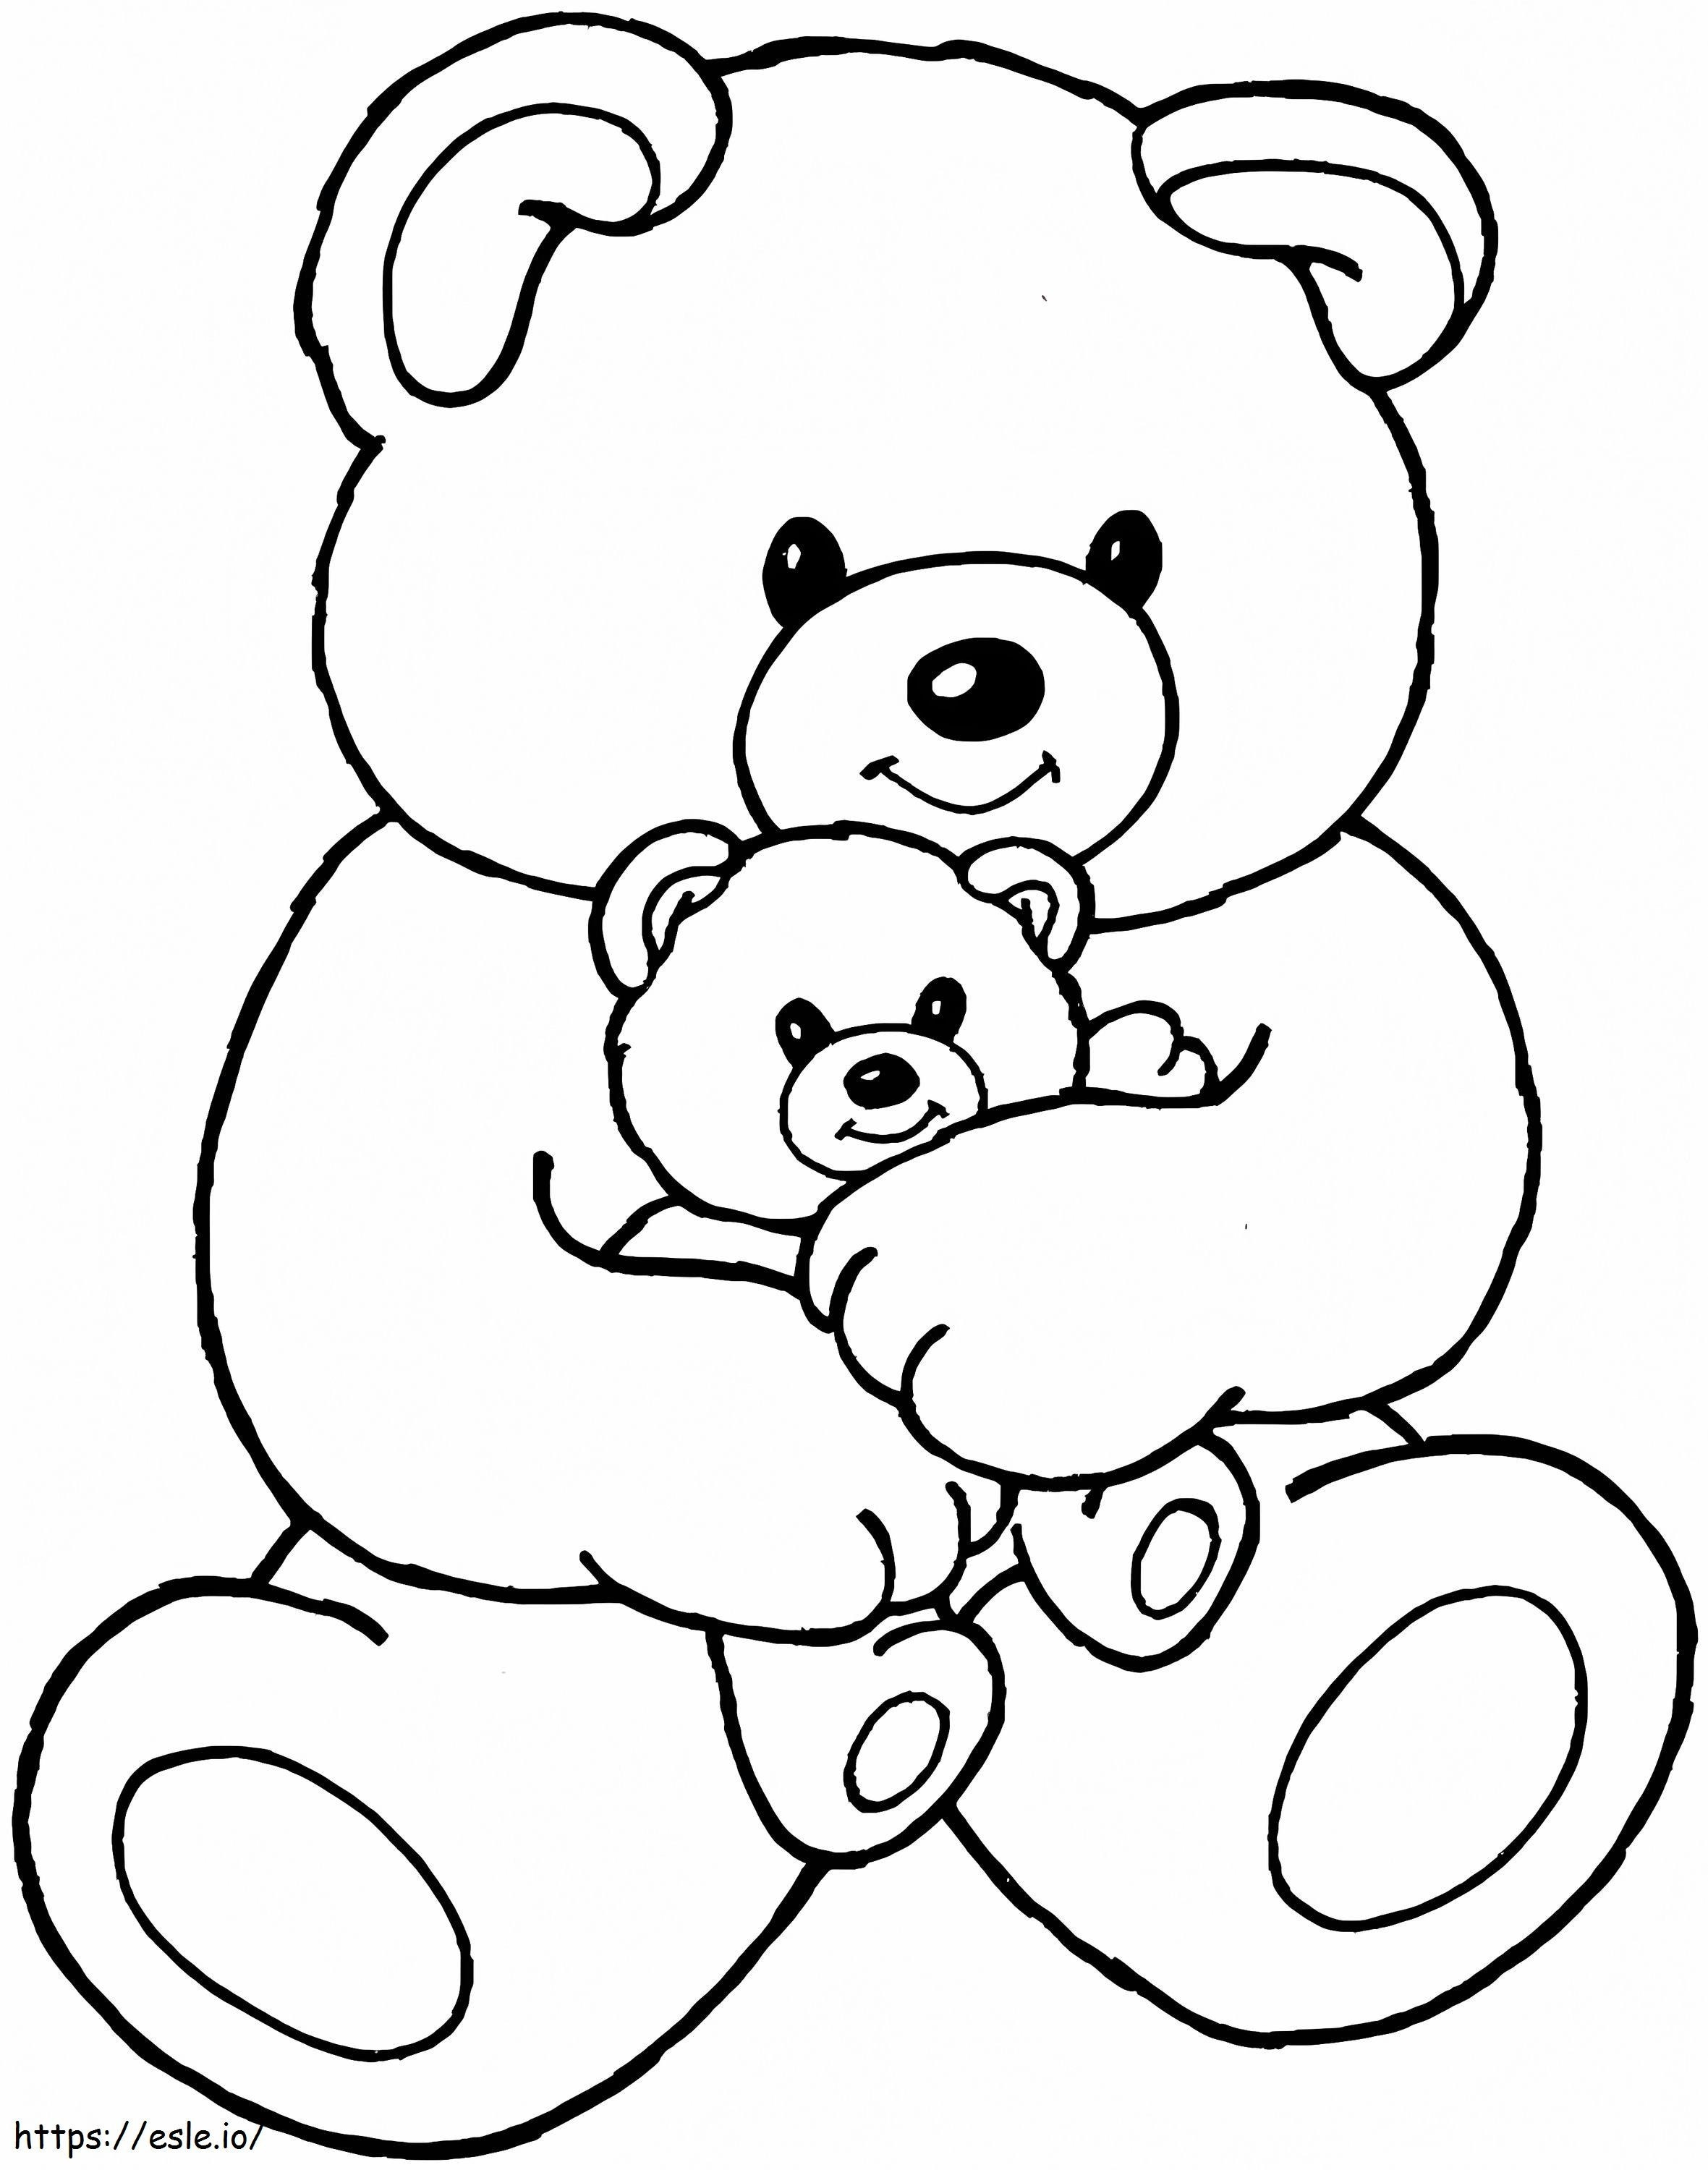 Big And Small Teddy Bears coloring page